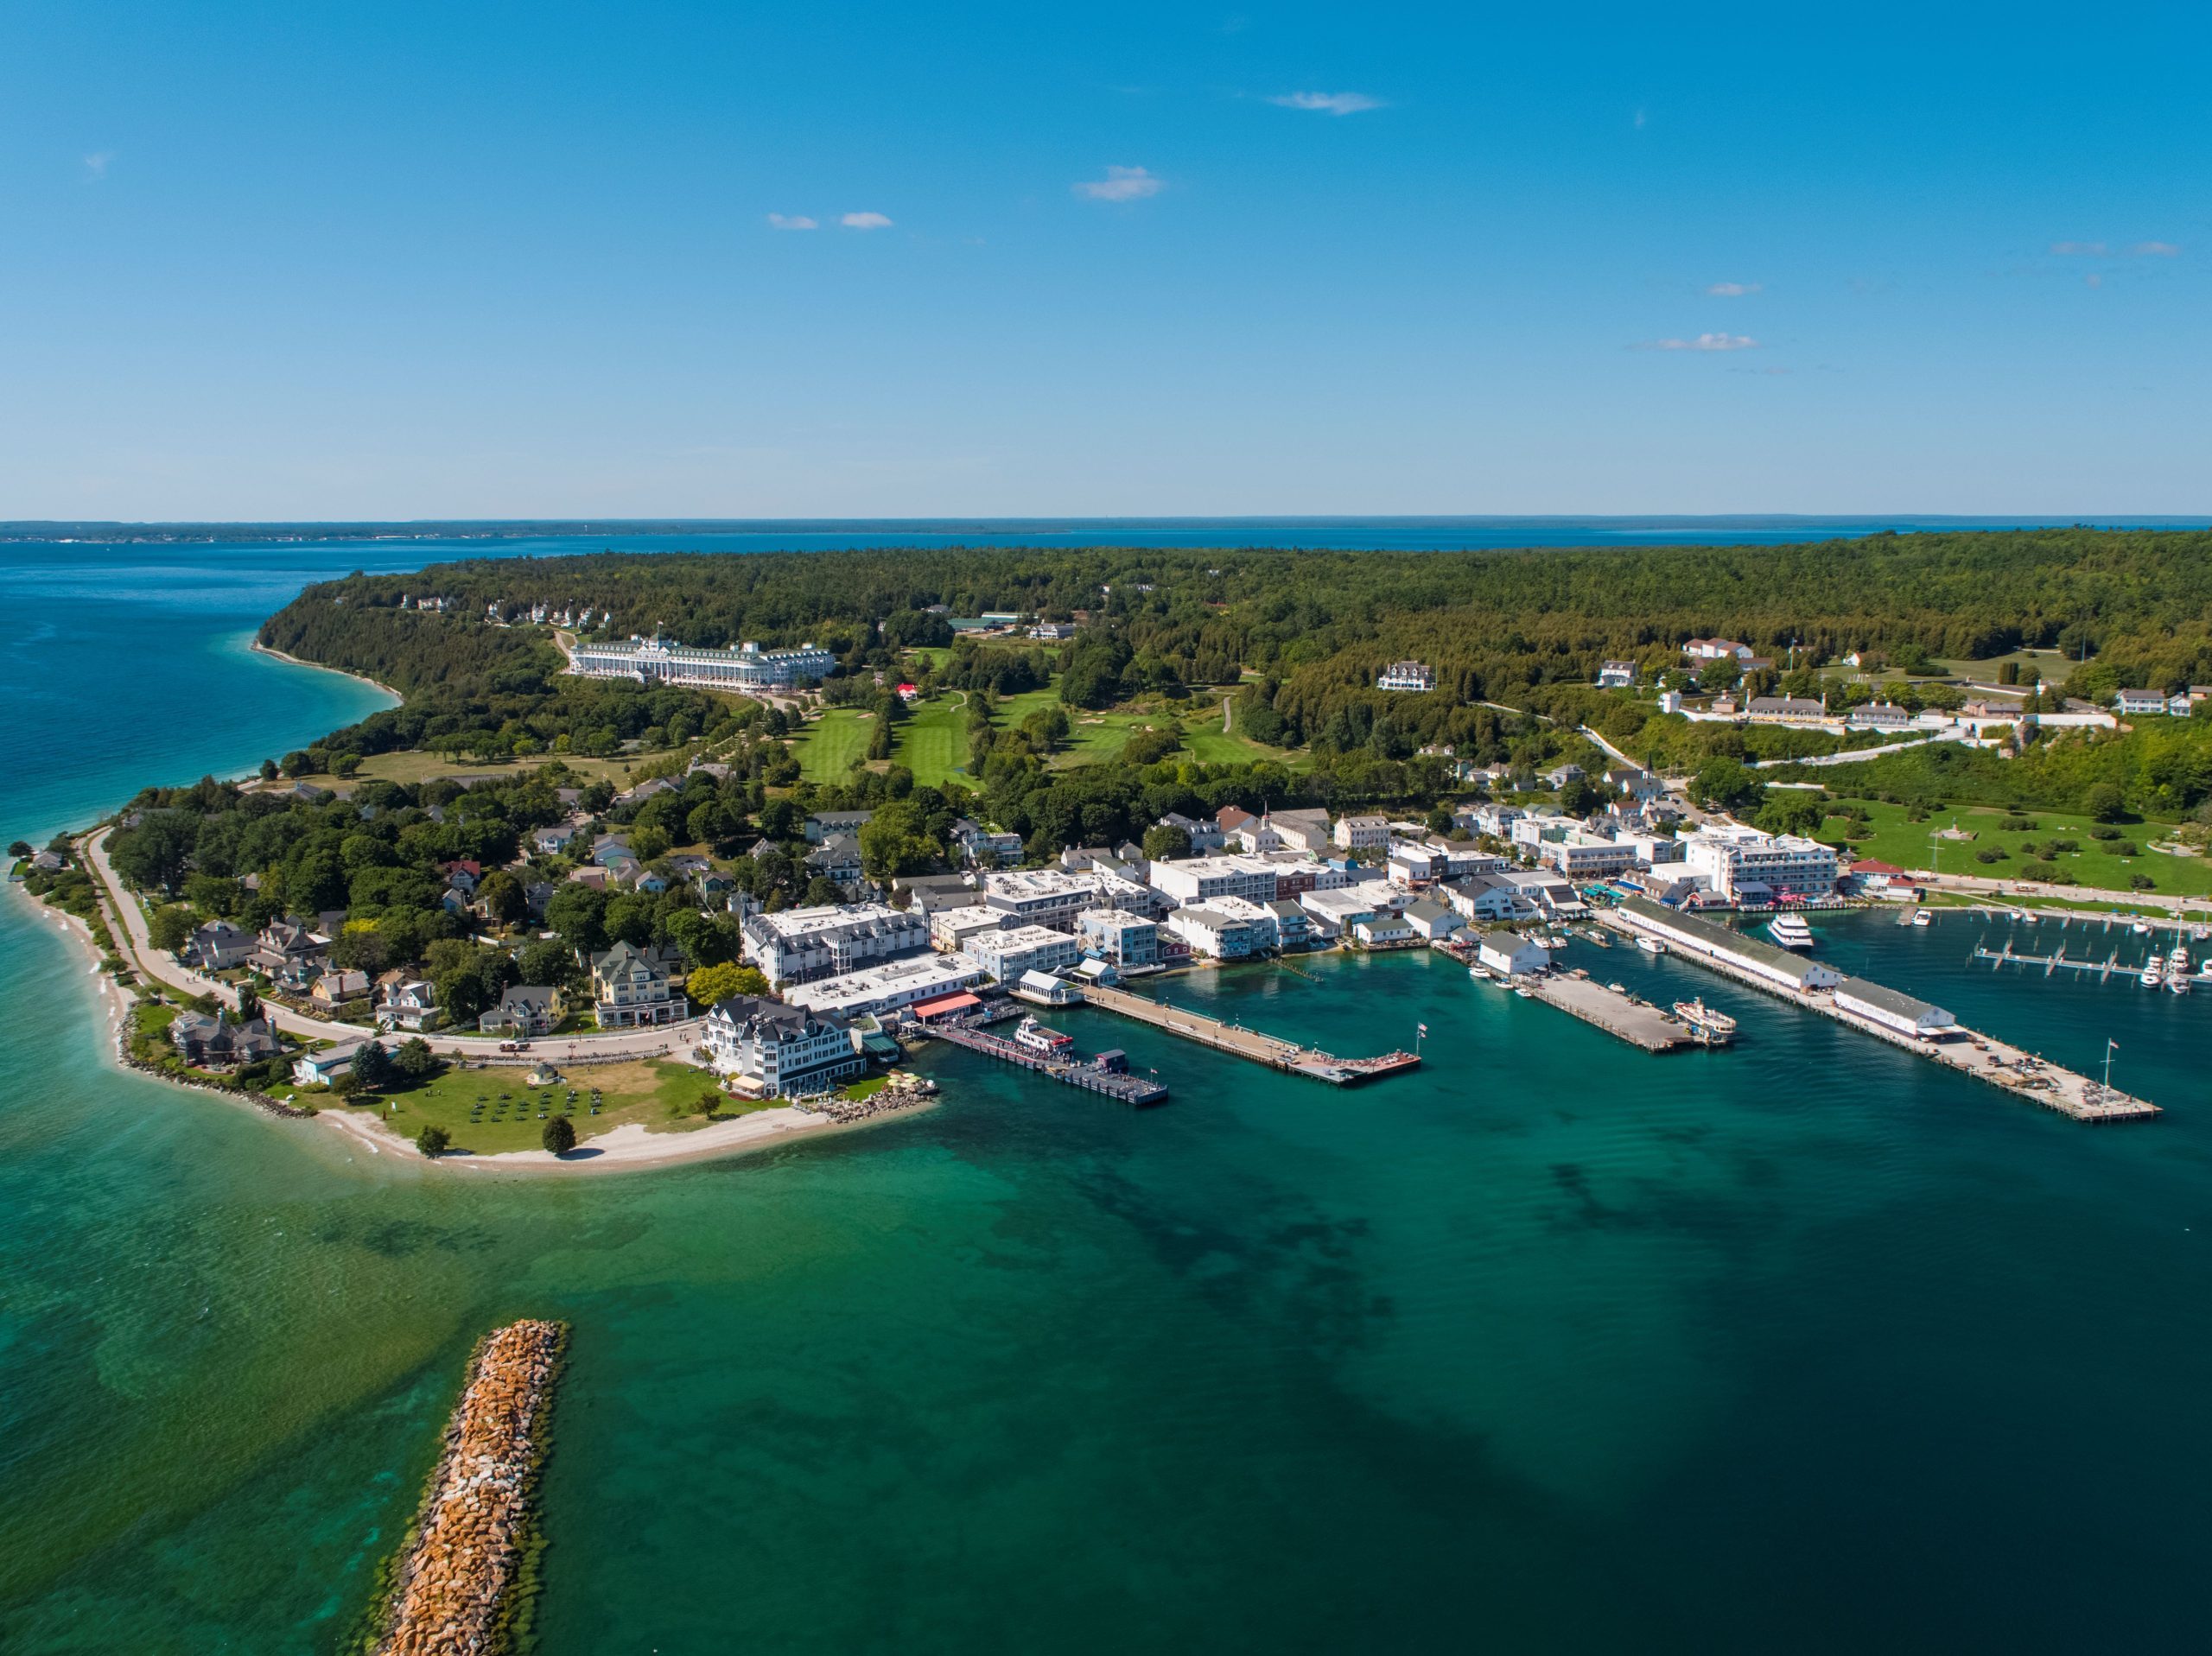 Aerial view of downtown Mackinac Island on a beautiful sunny day